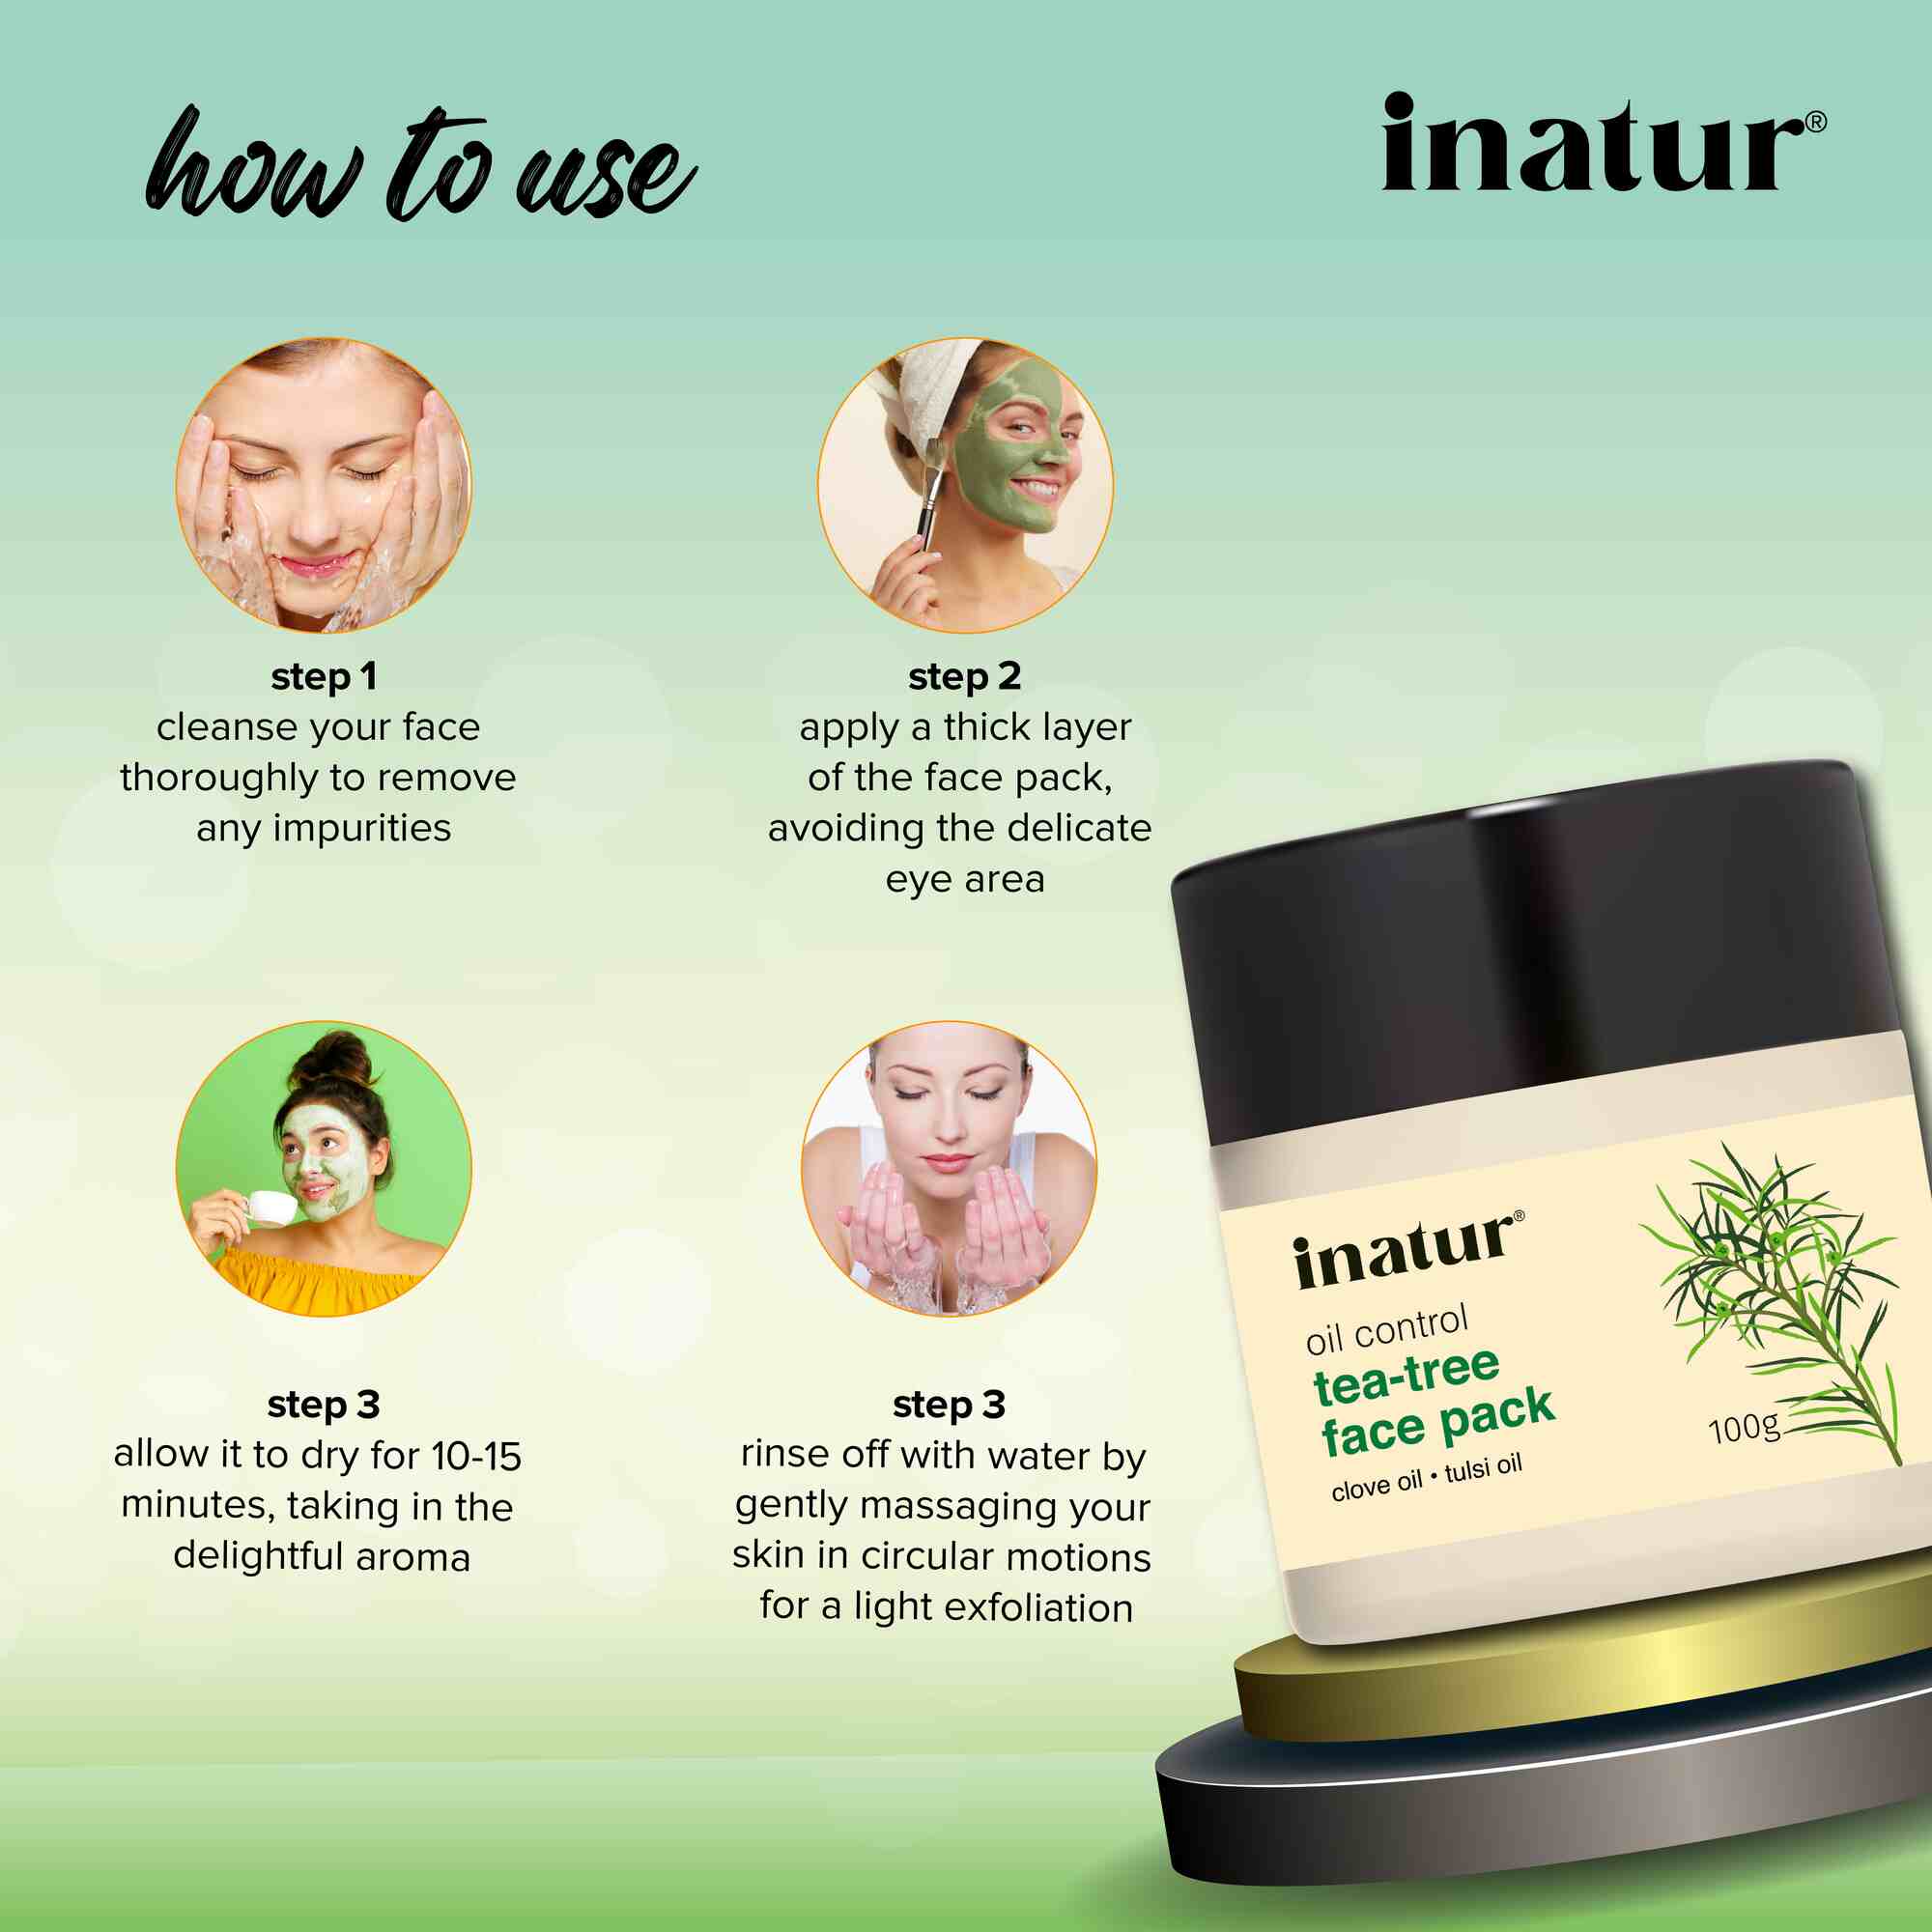 how to use tea tree face pack